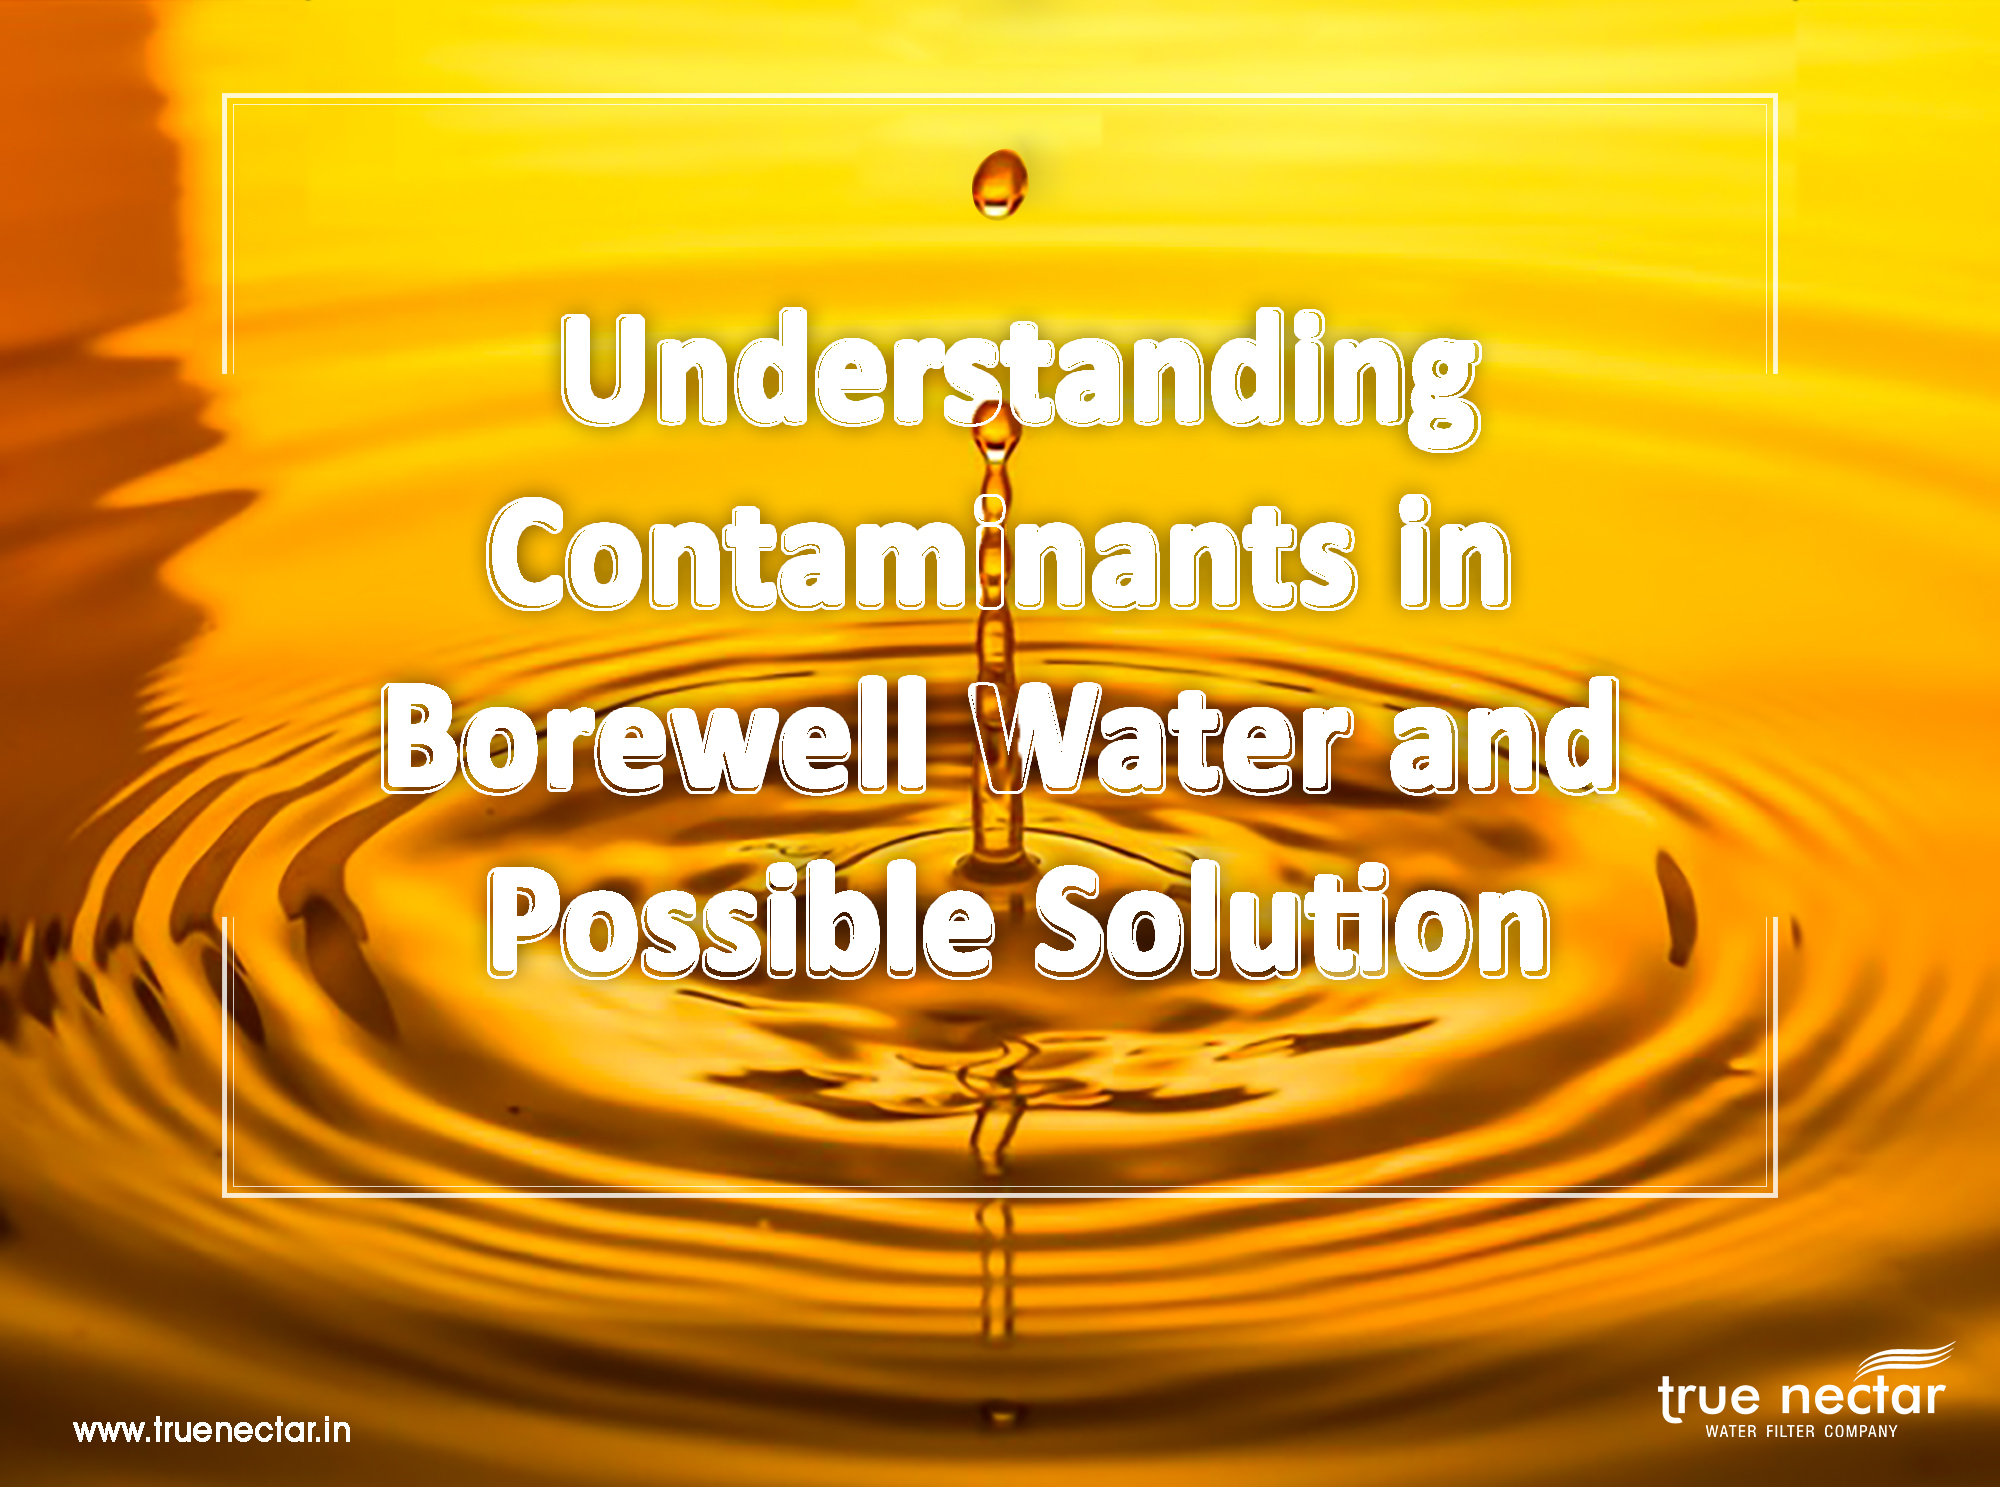 Understanding Contaminants in Borewell Water and Possible Solution